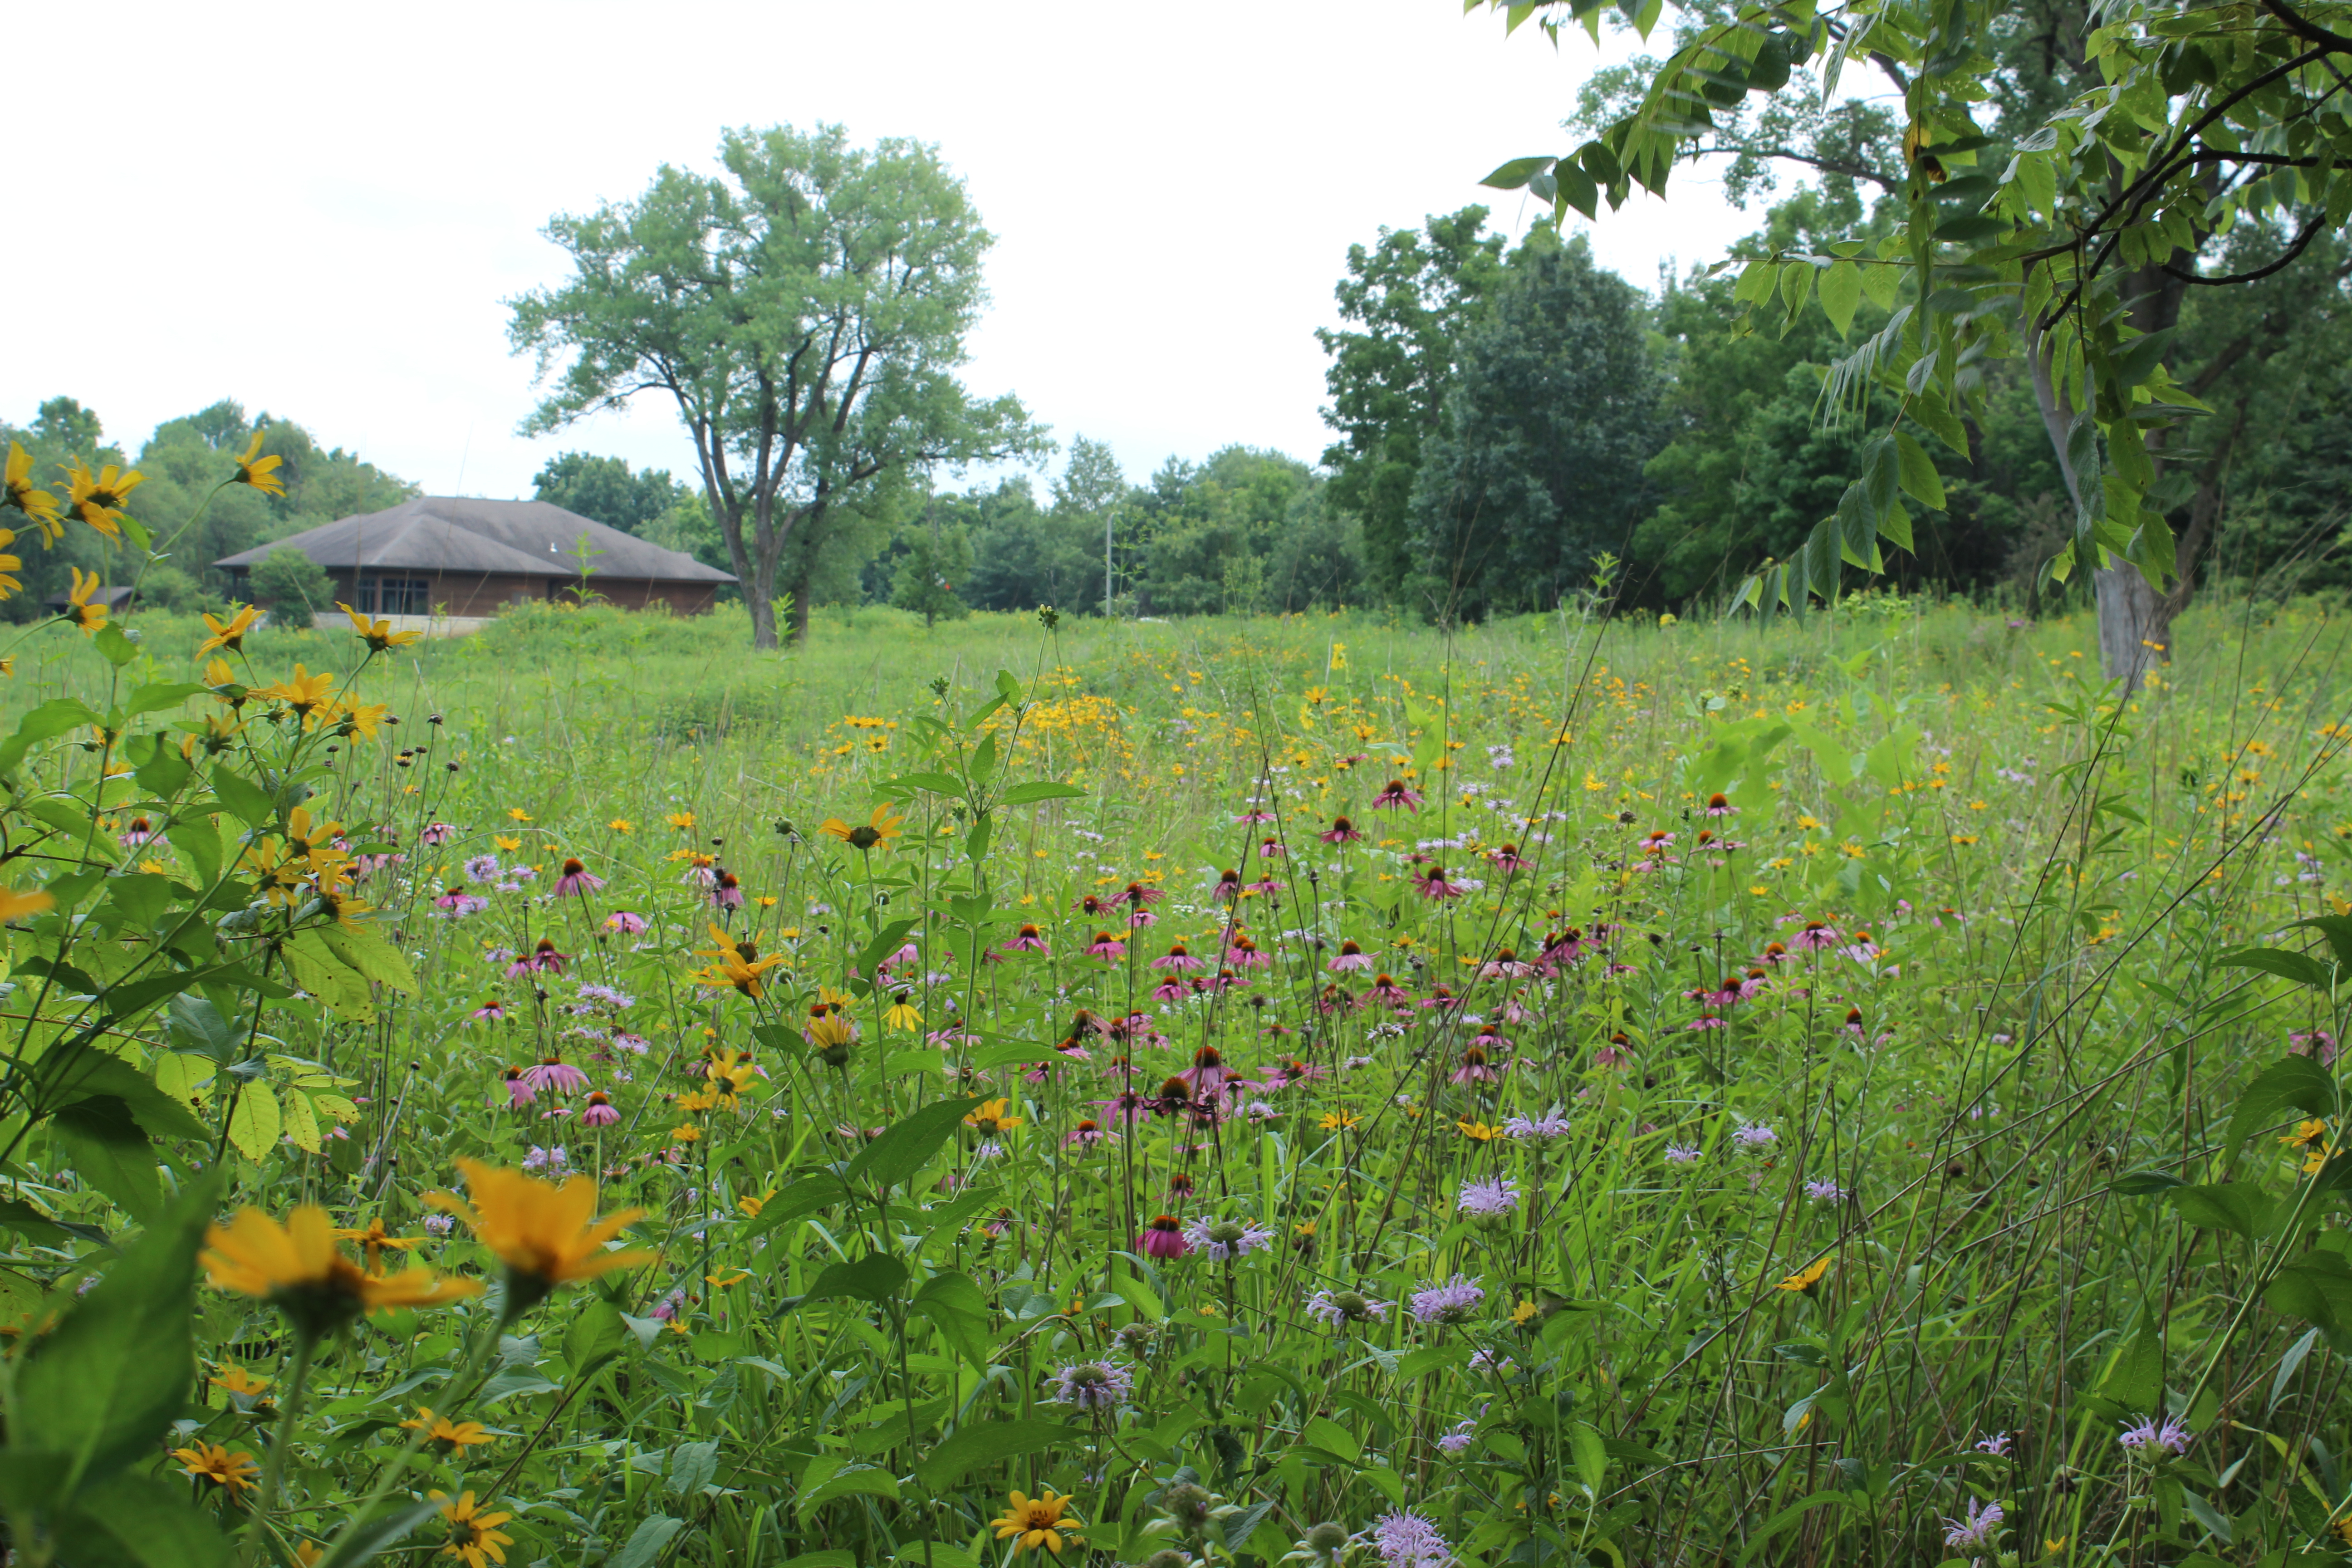 Tallgrass prairie at the Conservation Education Center at F.W. Kent Park.